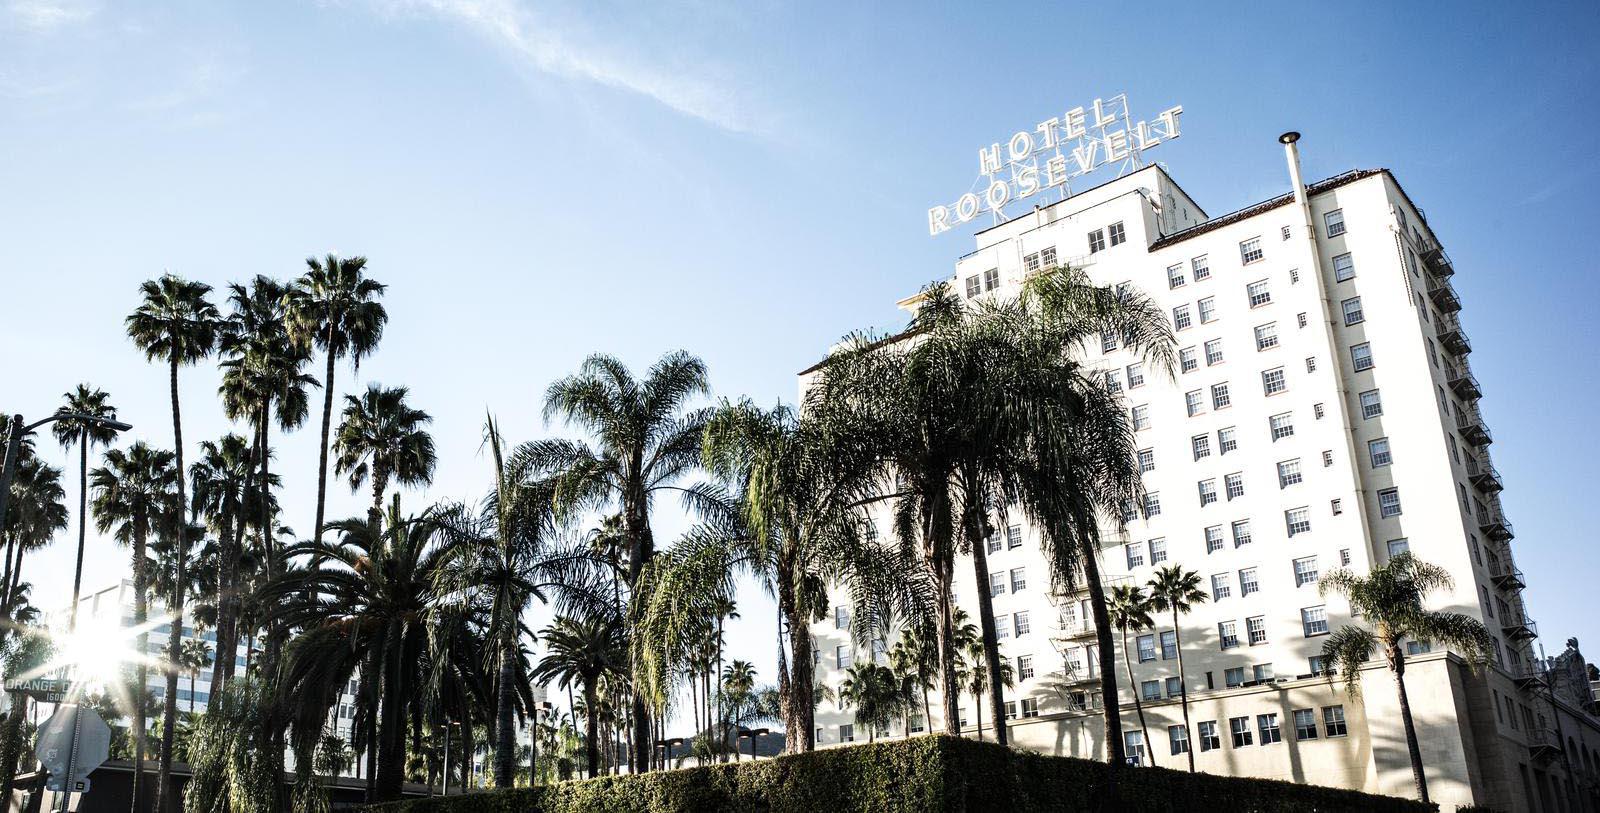 Image of Hotel Exterior with Palm Trees The Hollywood Roosevelt, 1927, Member of Historic Hotels of America, in Hollywood, California, Overview Video